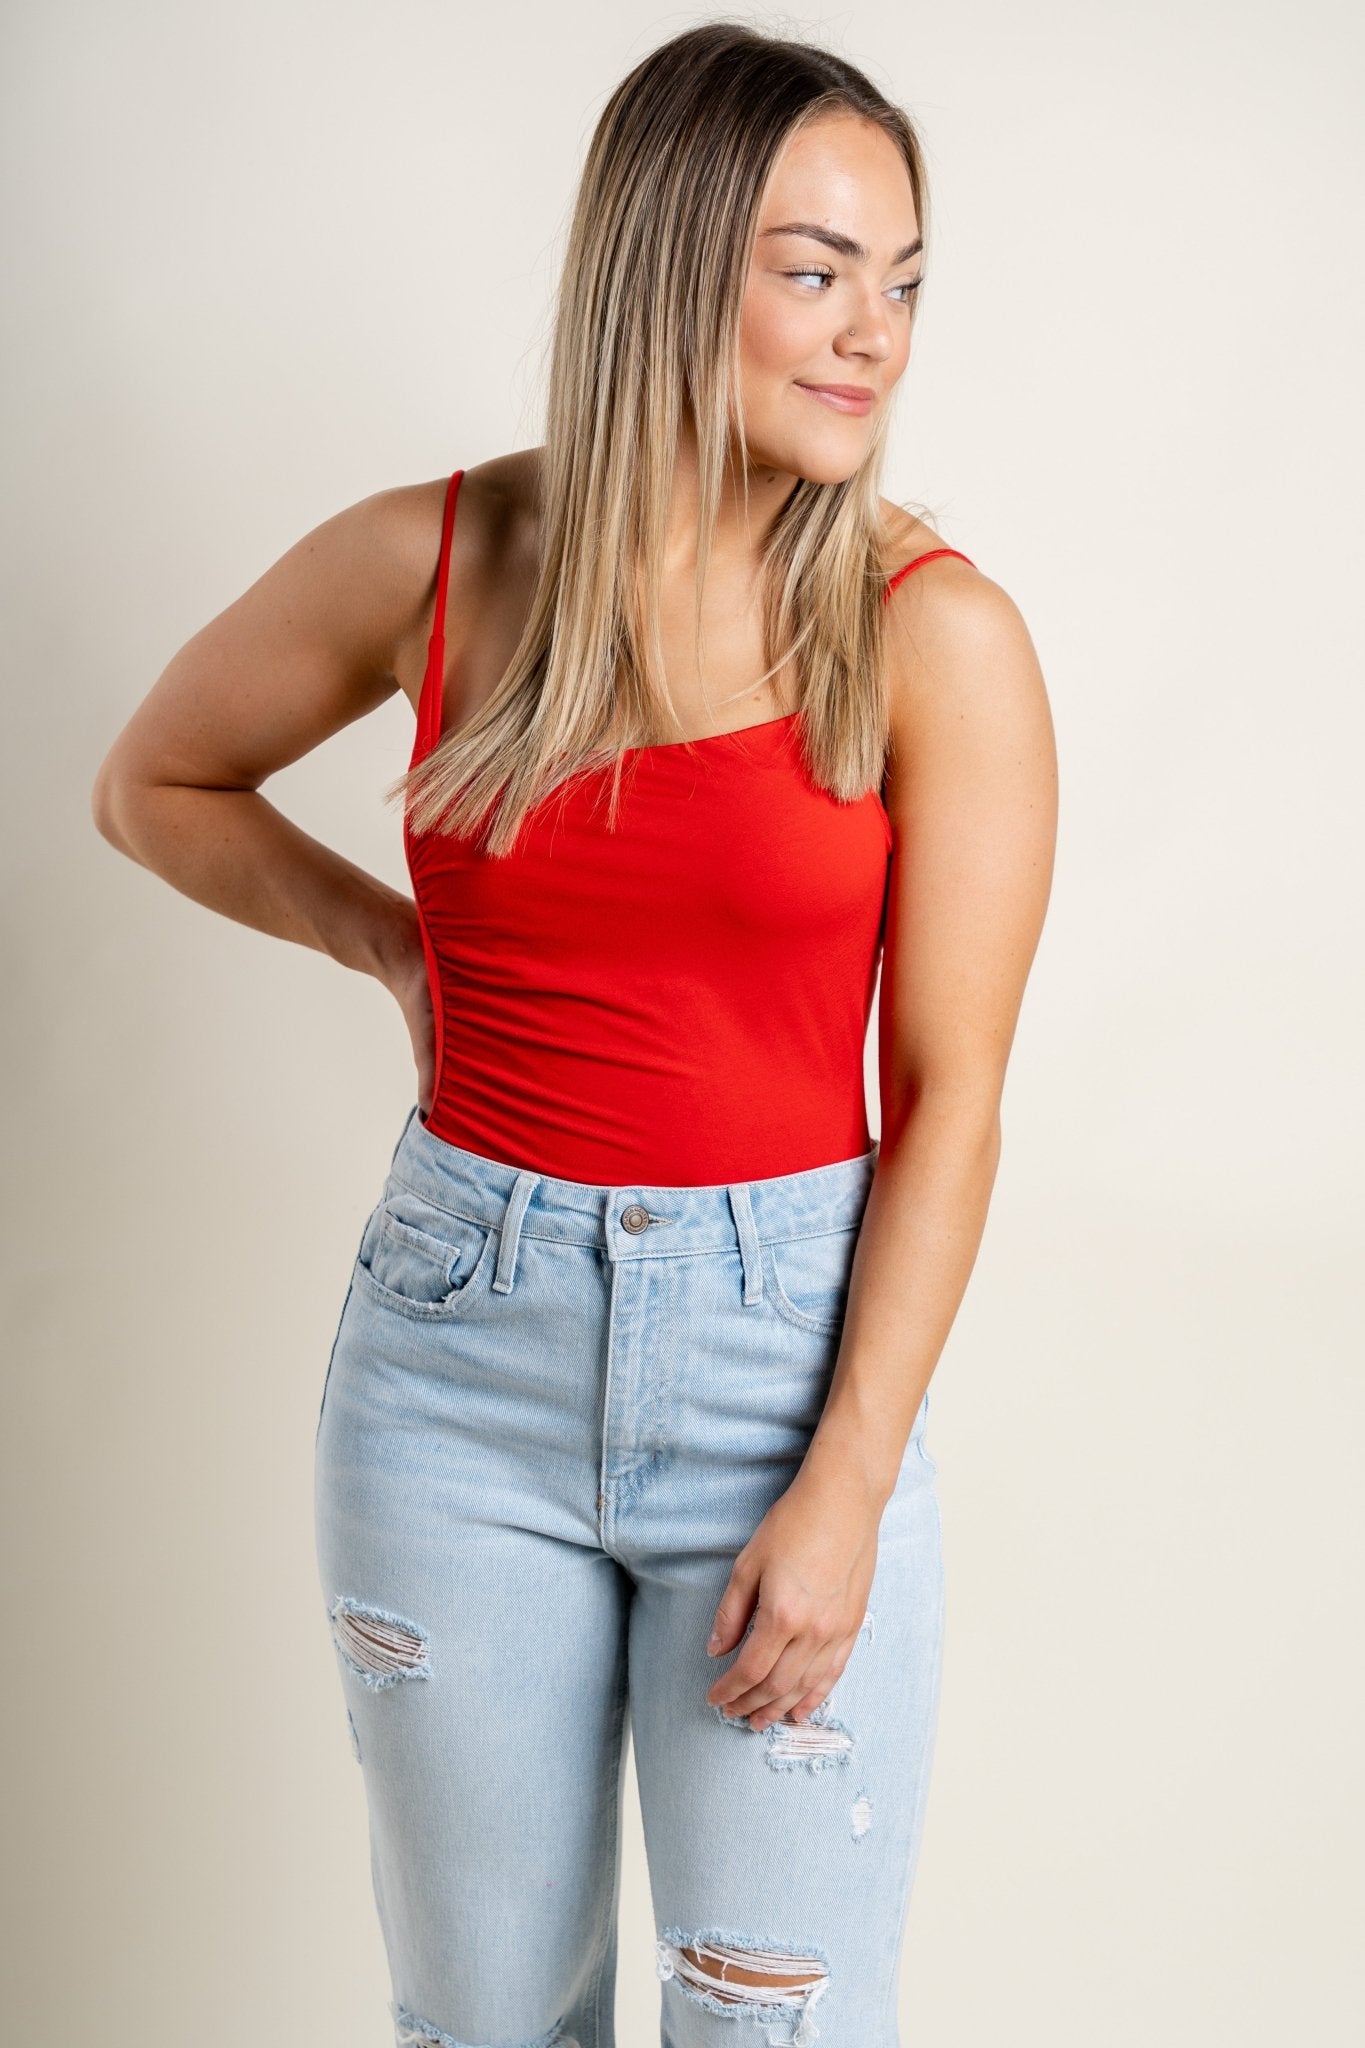 Asymmetrical bodysuit red - Affordable bodysuit - Boutique Bodysuits at Lush Fashion Lounge Boutique in Oklahoma City